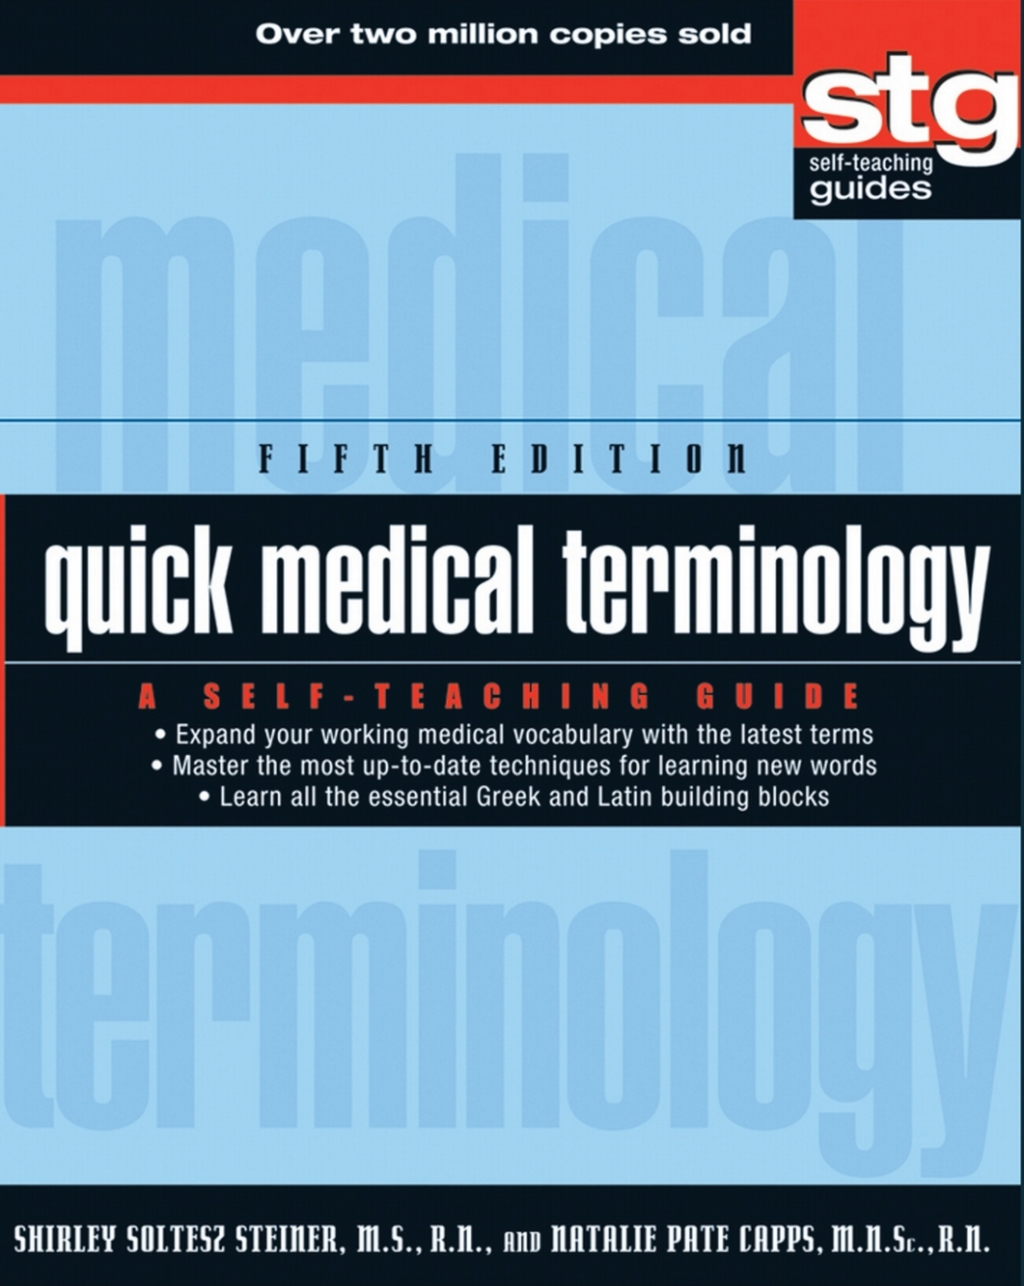 Quick Medical Terminology - 5th Edition (eBook)